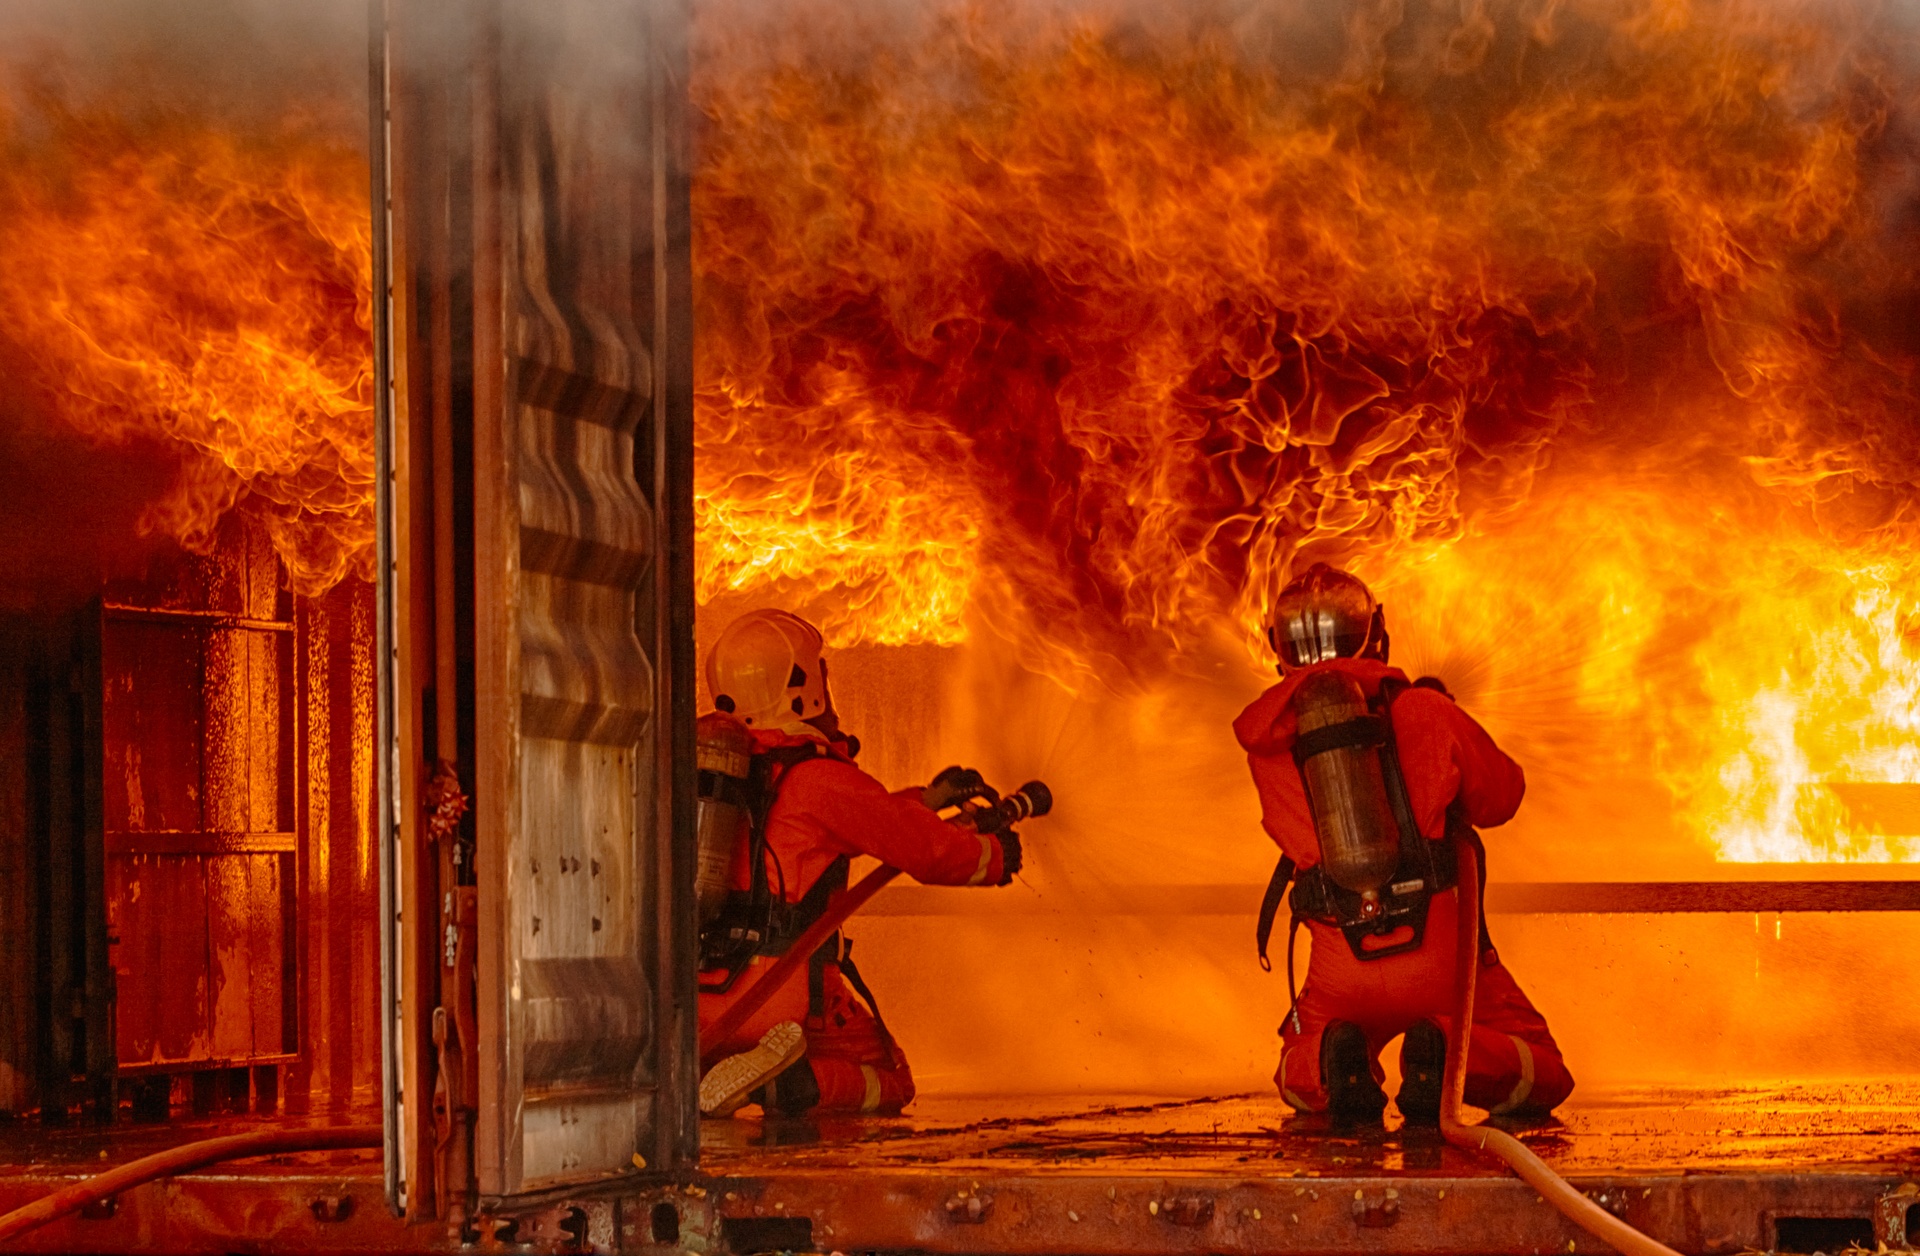 Fire fighting systems